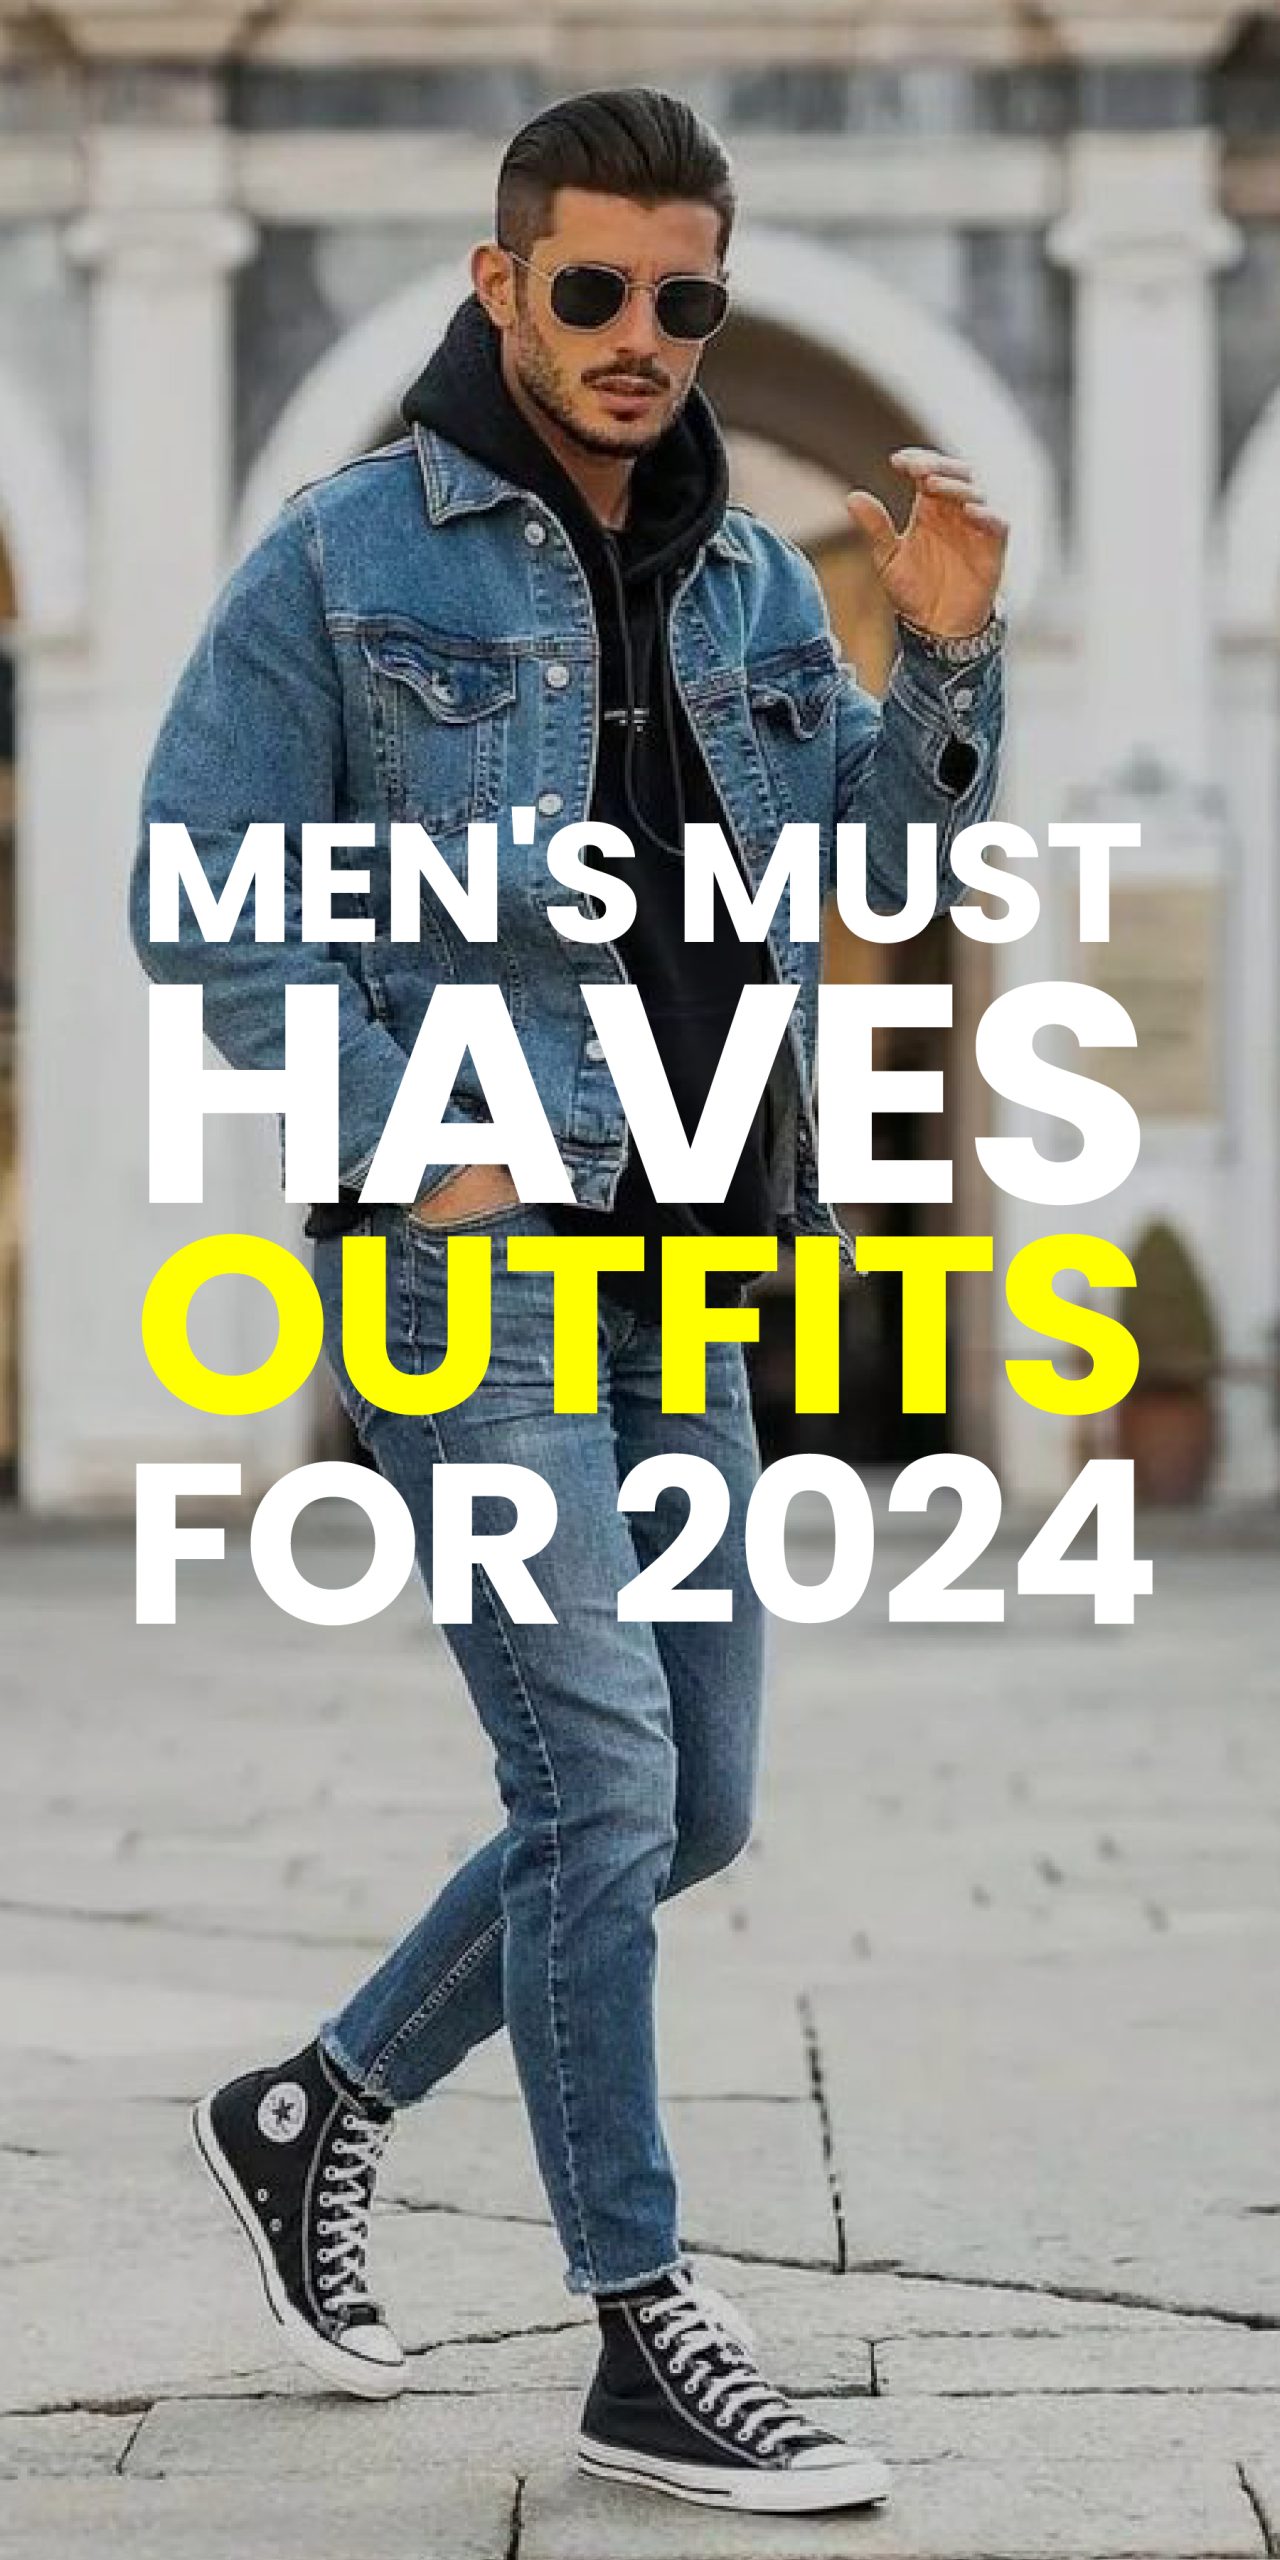 MEN’S MUST HAVE OUTFITS FOR 2024